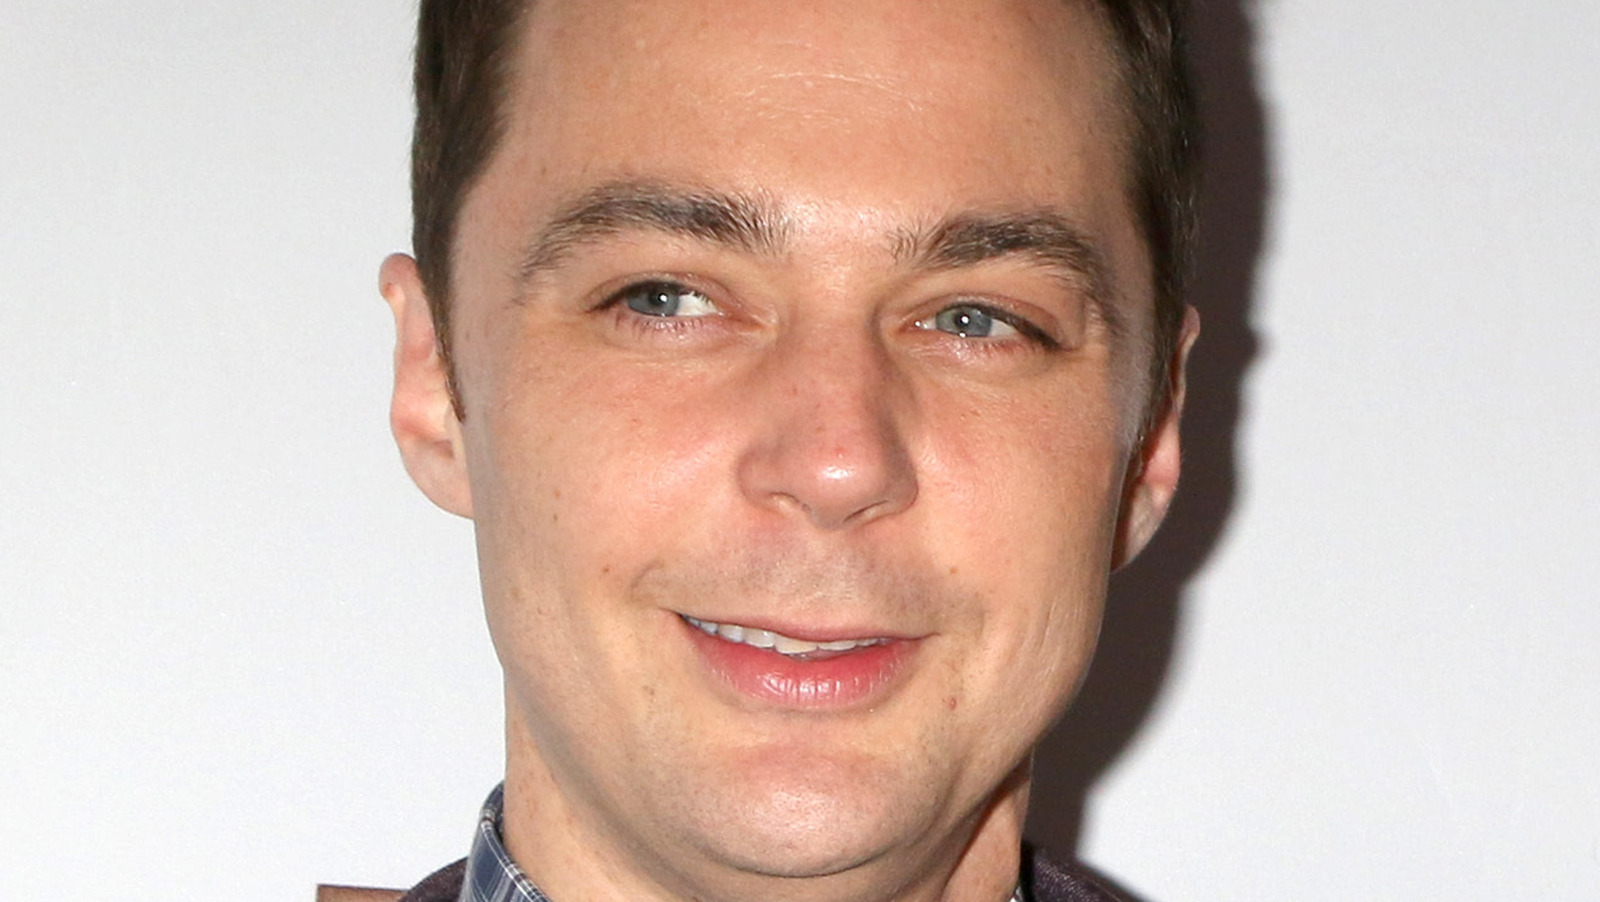 Jim Parsons felt watching Iain Armitage’s Young Sheldon Audition.